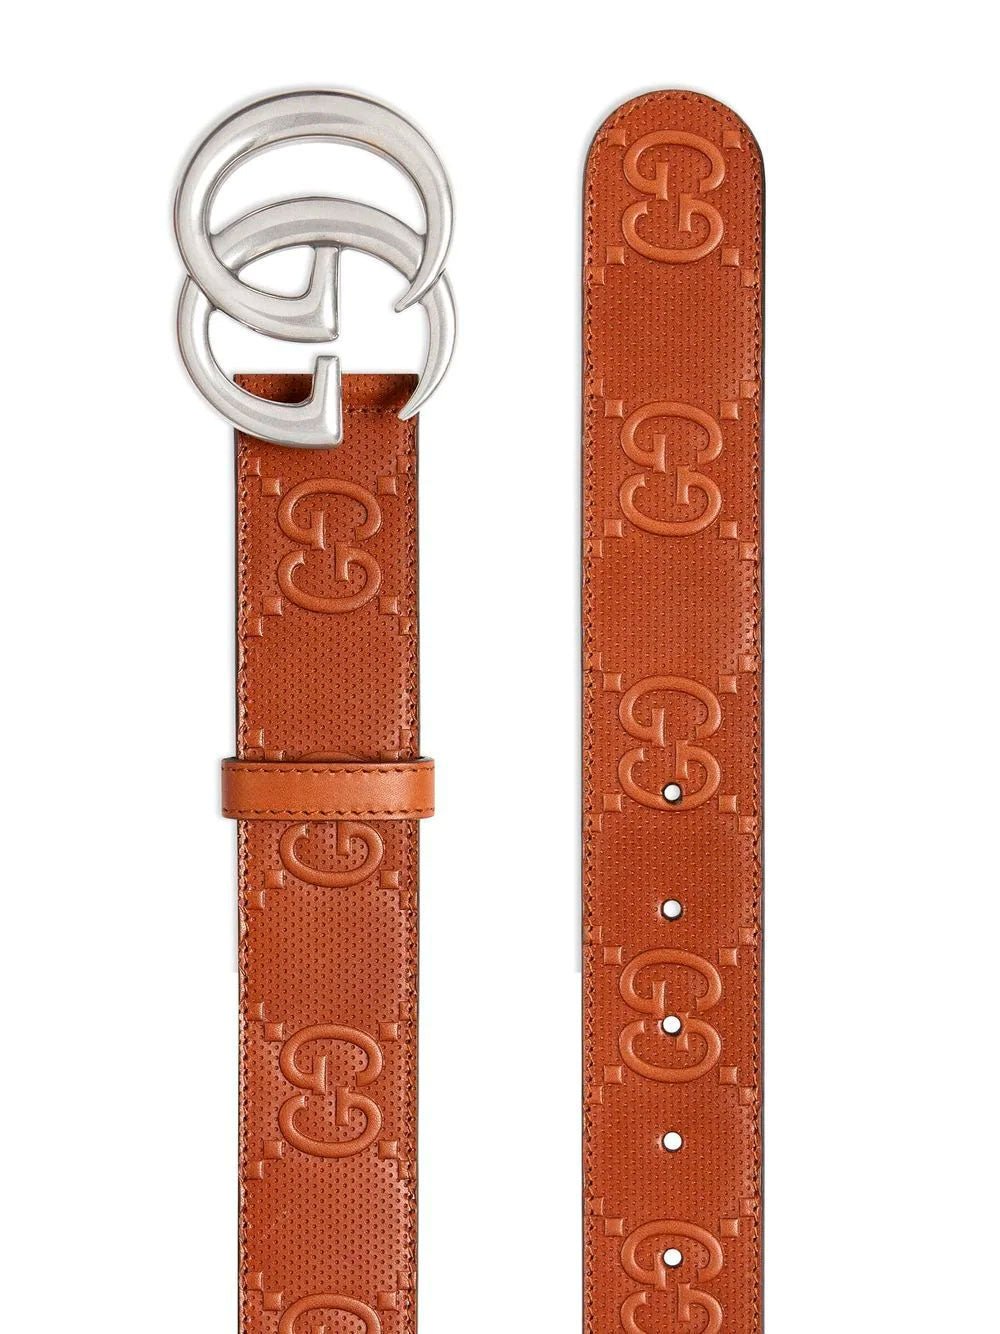 GucciLeather Belt at Fashion Clinic